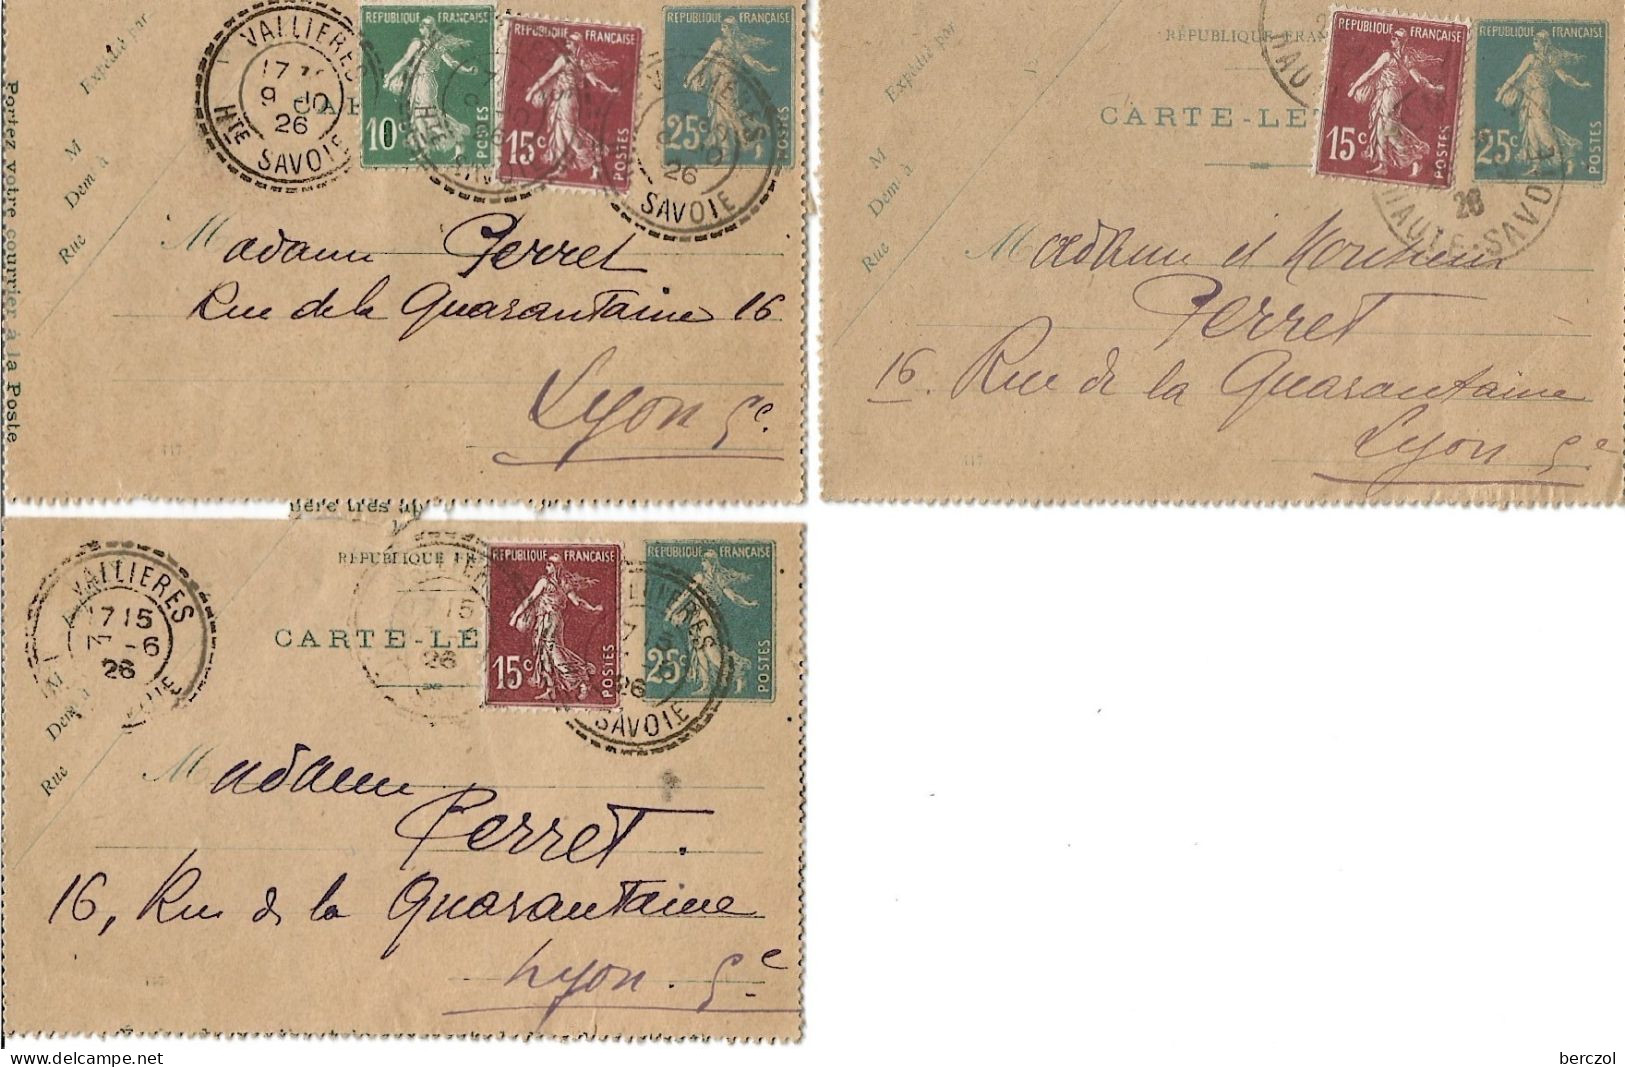 FRANCE ANNEE1907/1939 LOT DE 3 ENTIERS TYPE SEMEUSE CAMEE N° 140 CL1  TB DATE : 417 - Cartes-lettres